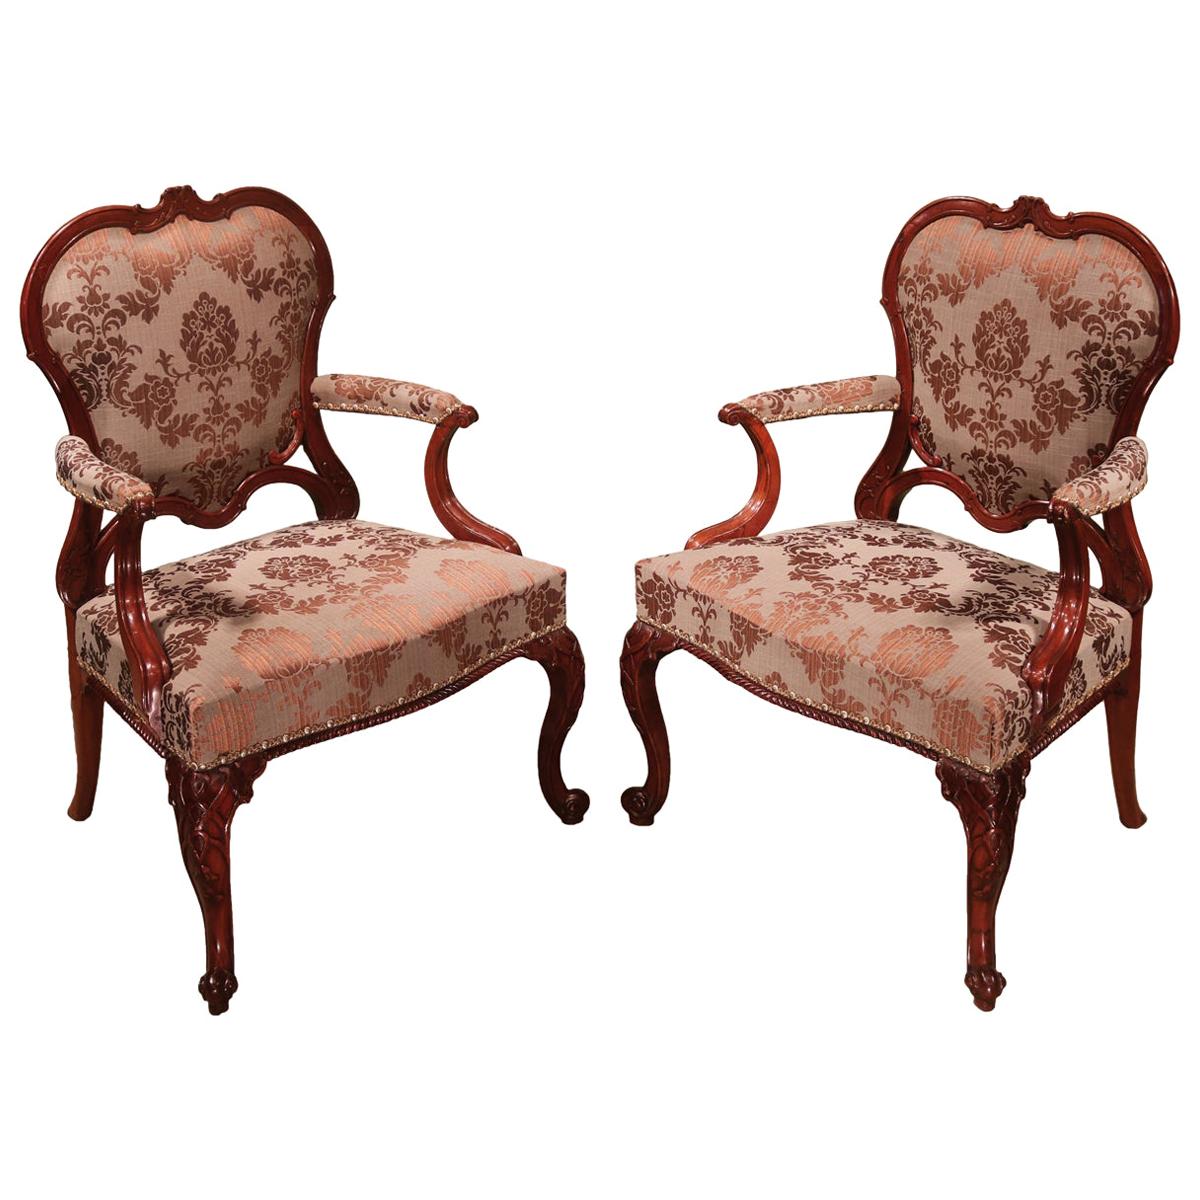 Pair of 18th Century Chippendale Mahogany Library Armchairs